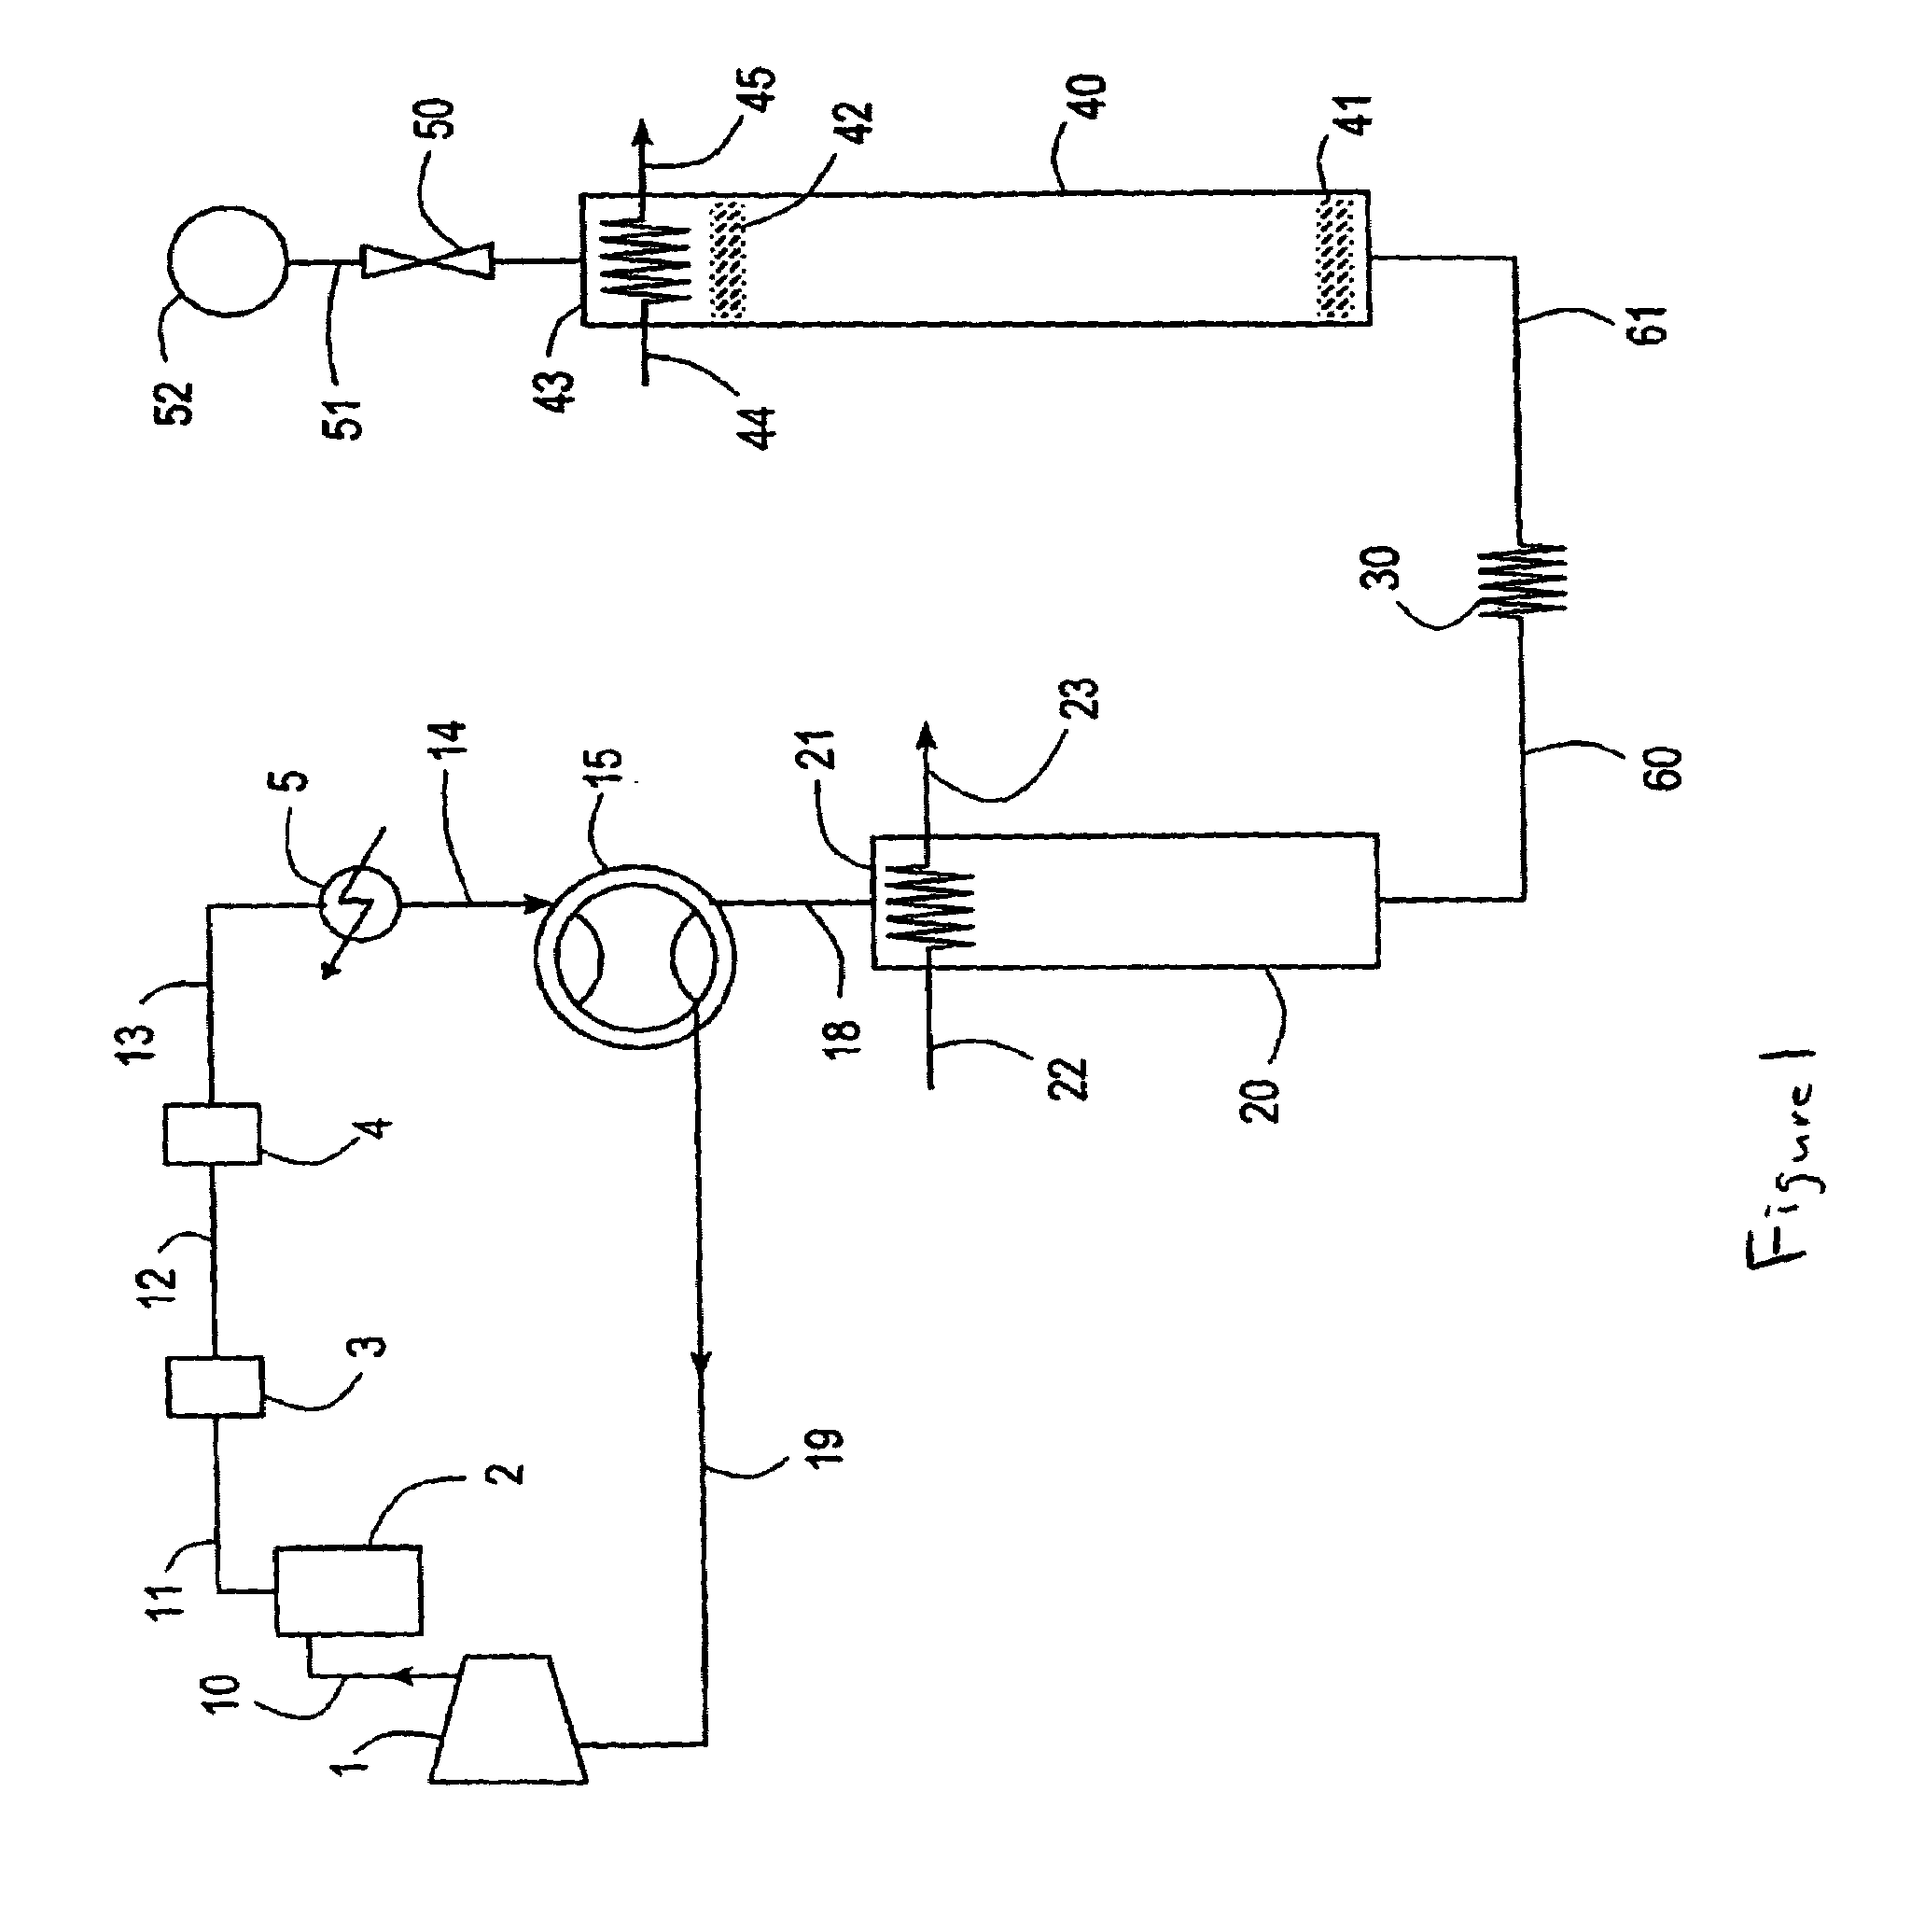 Method for operating a cryocooler using on line contaminant monitoring